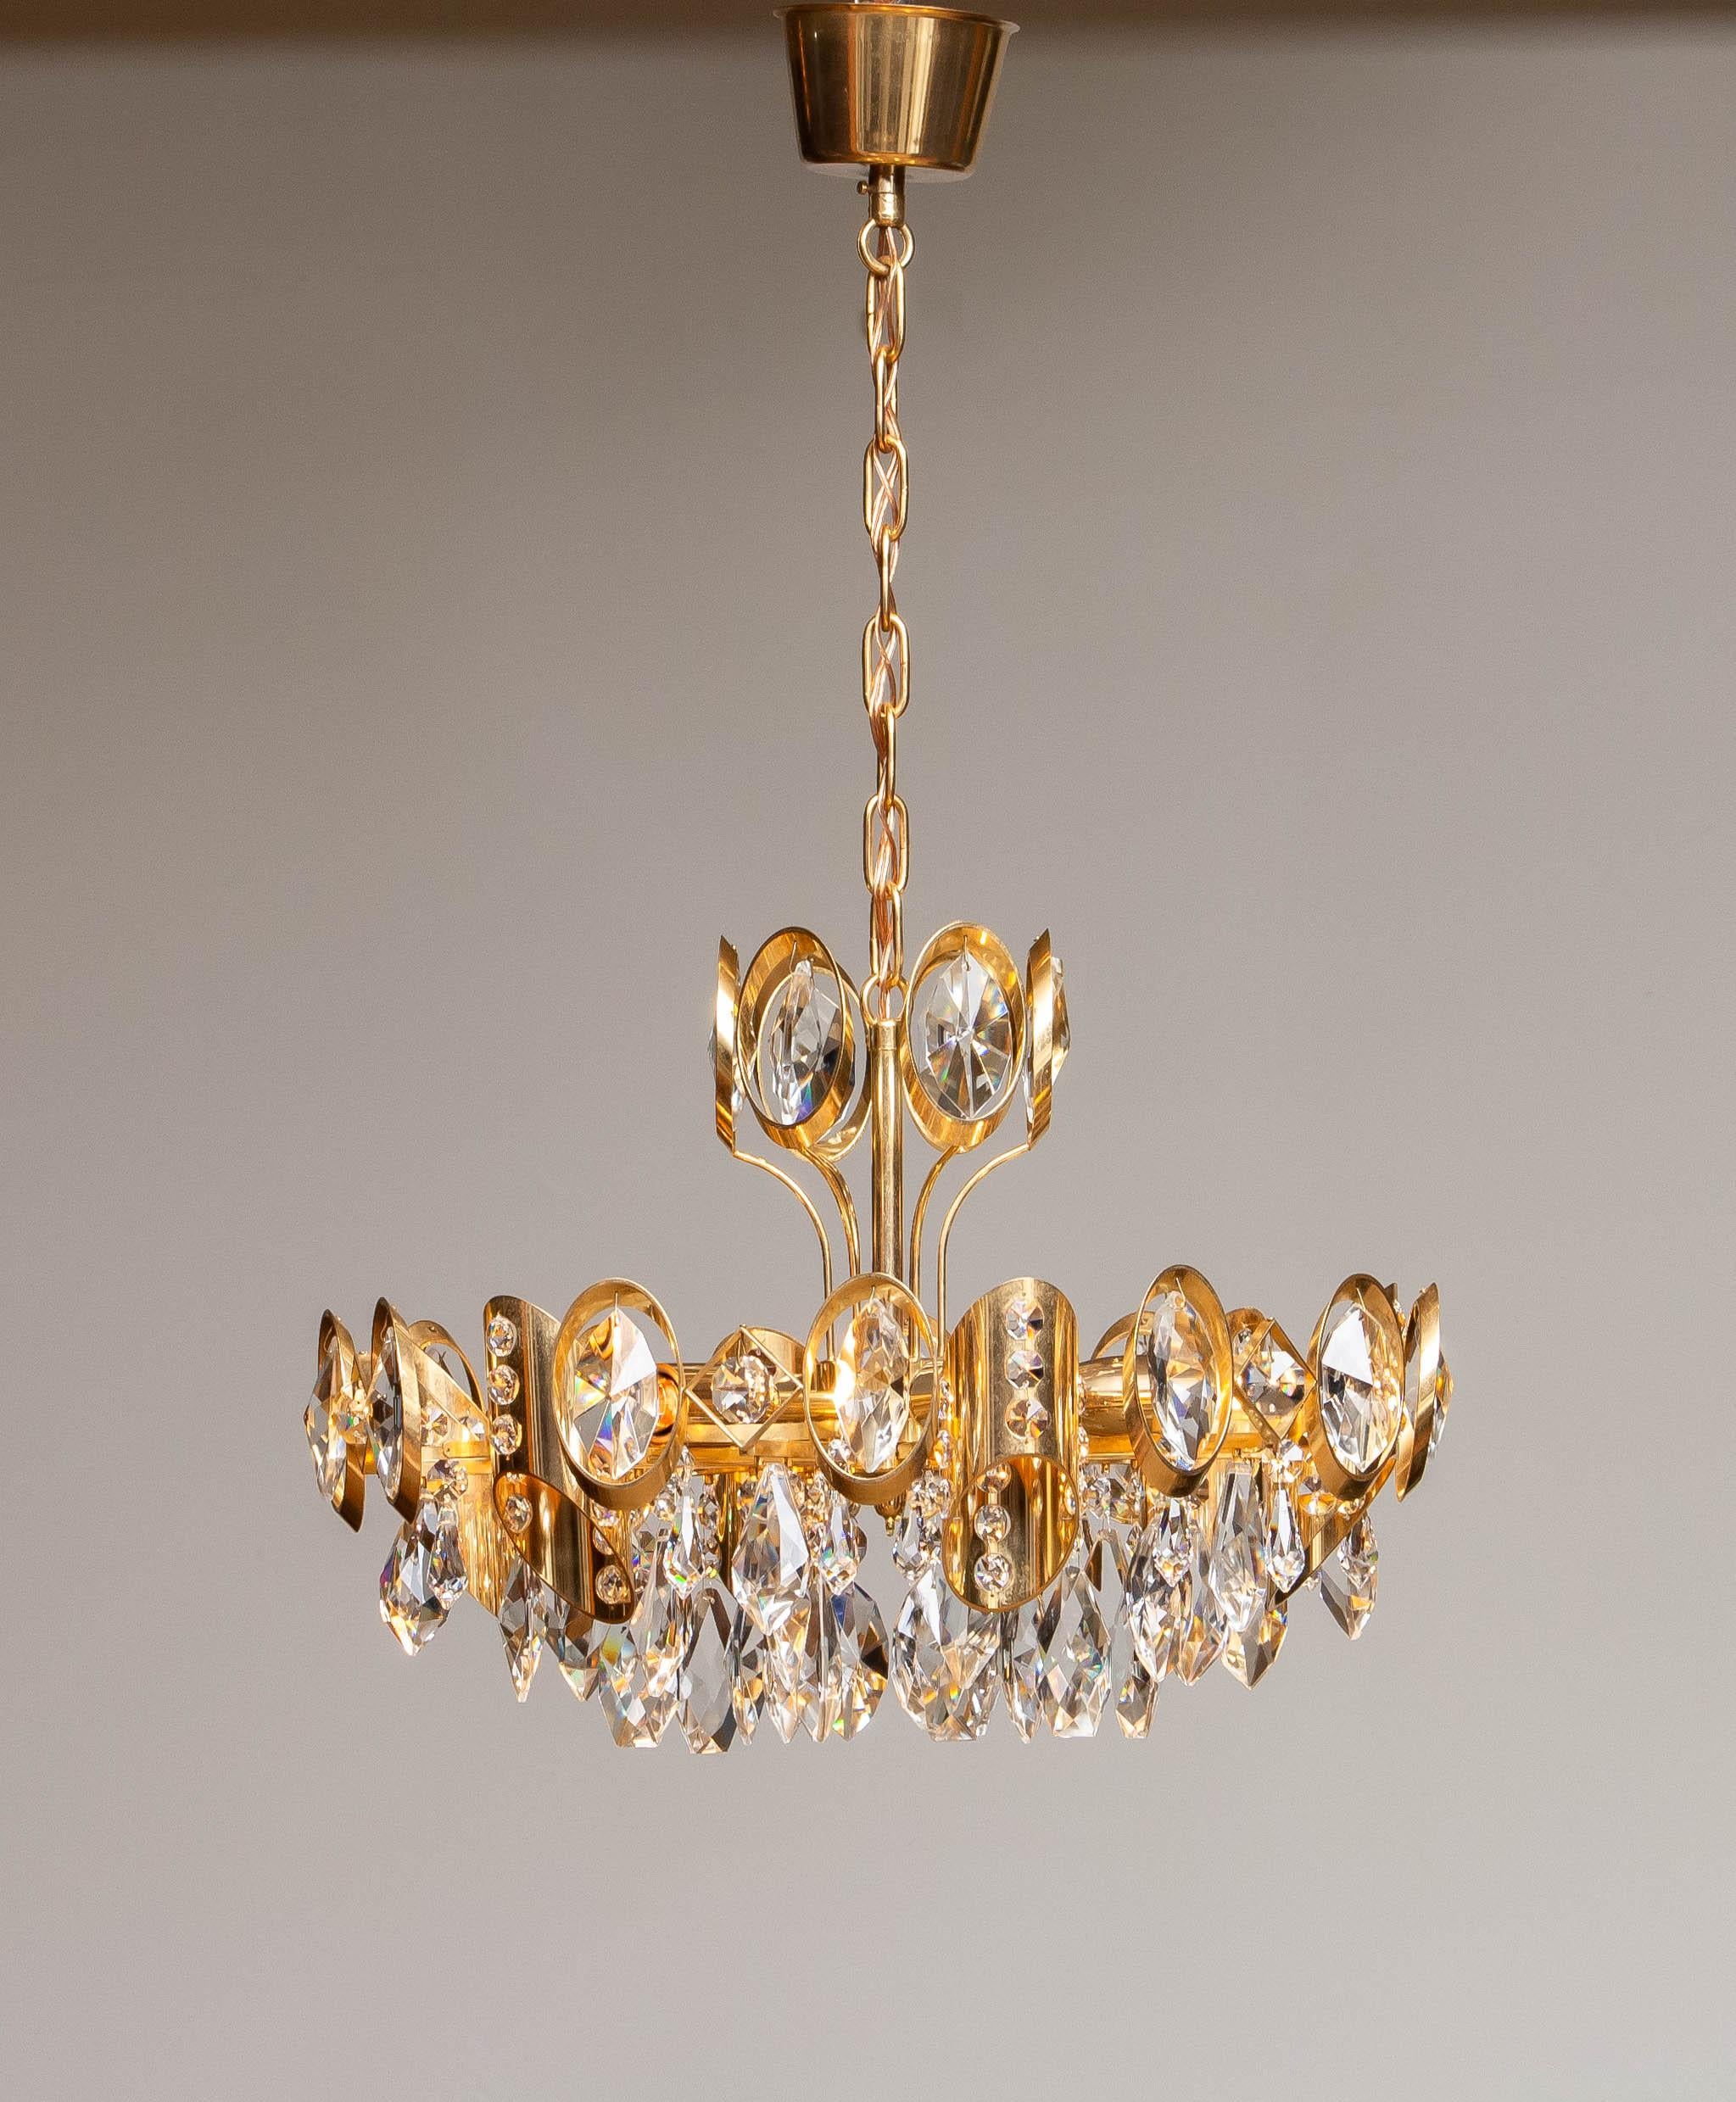 Beautiful high quality gilt brass fixture filled with stunning faceted crystals by Ernest Palme for Palwa Austria.
This chandelier consists six E14 / E17 screw fittings for 110 or 230 volts. Technically 100% and in overall good condition.
The given